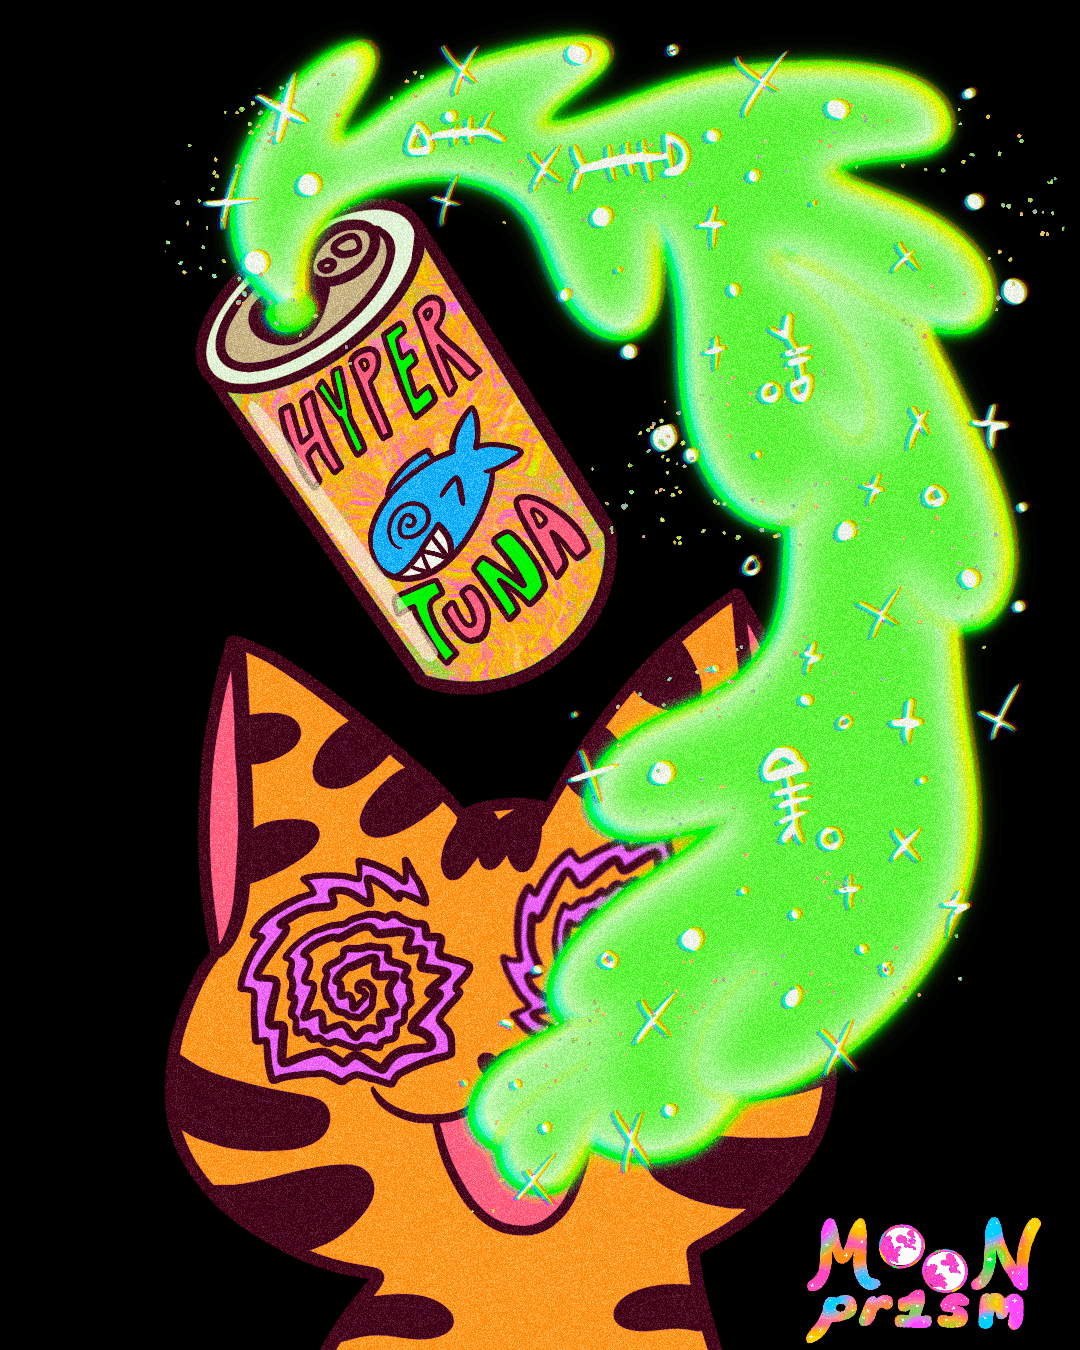 An illustration of a purple spiral-eyed orange striped cat drinking a neon green liquid full of sparkles and tiny fishbones from a can that says 'Hyper Tuna' on it.